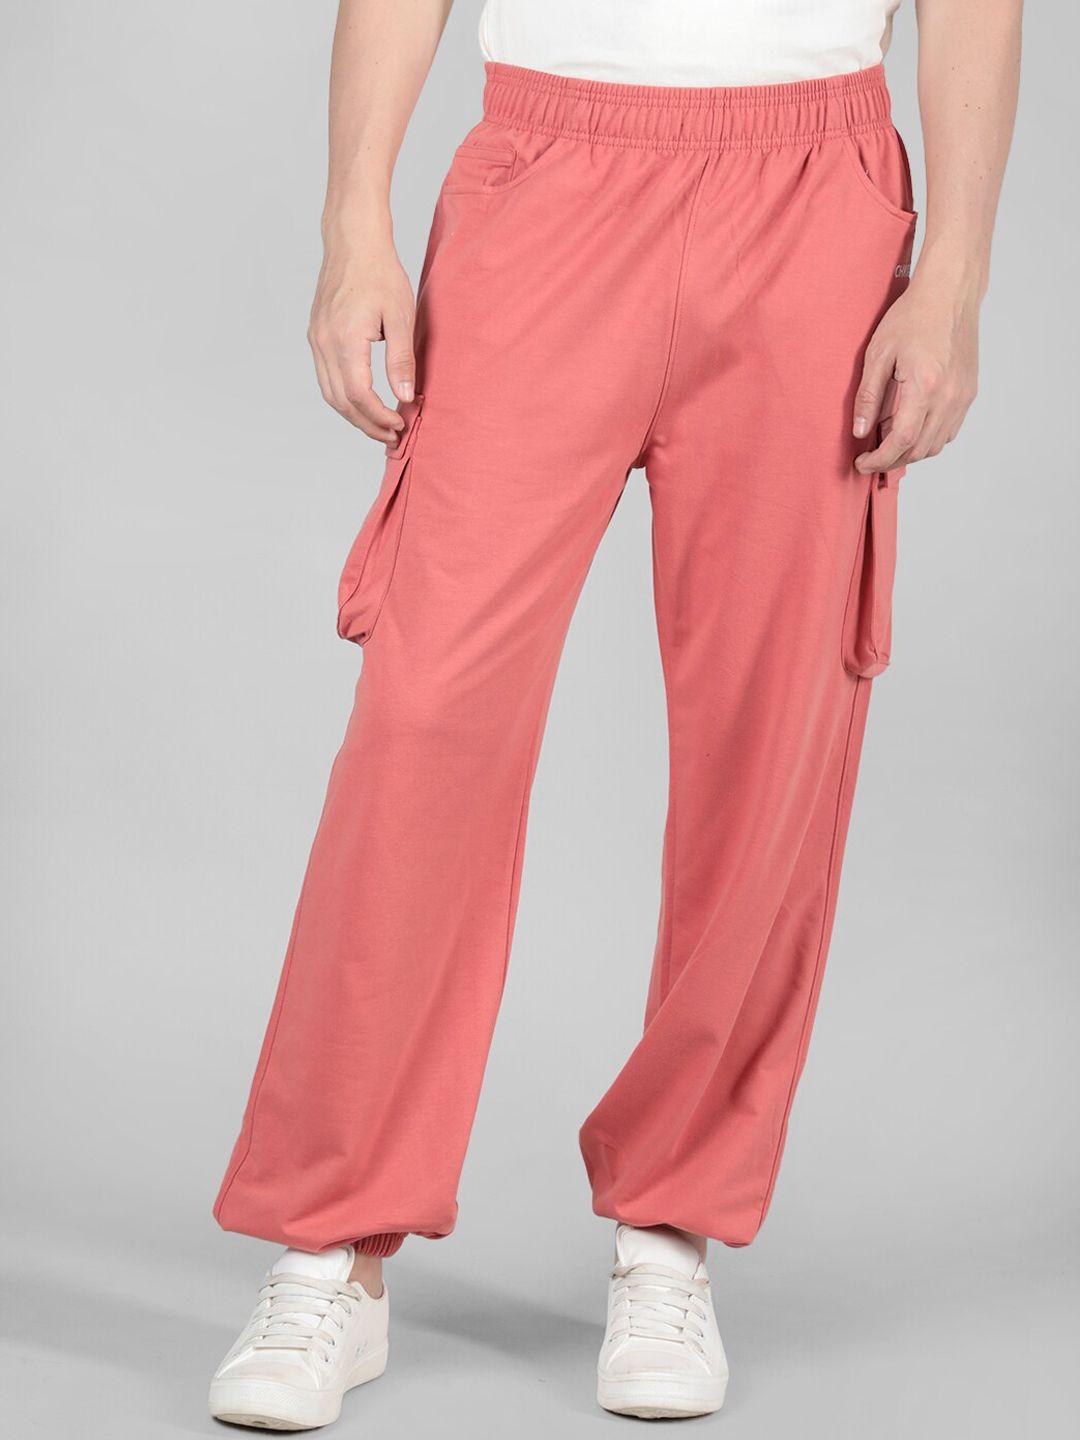 chkokko men relaxed fit mid-rise sports track pant